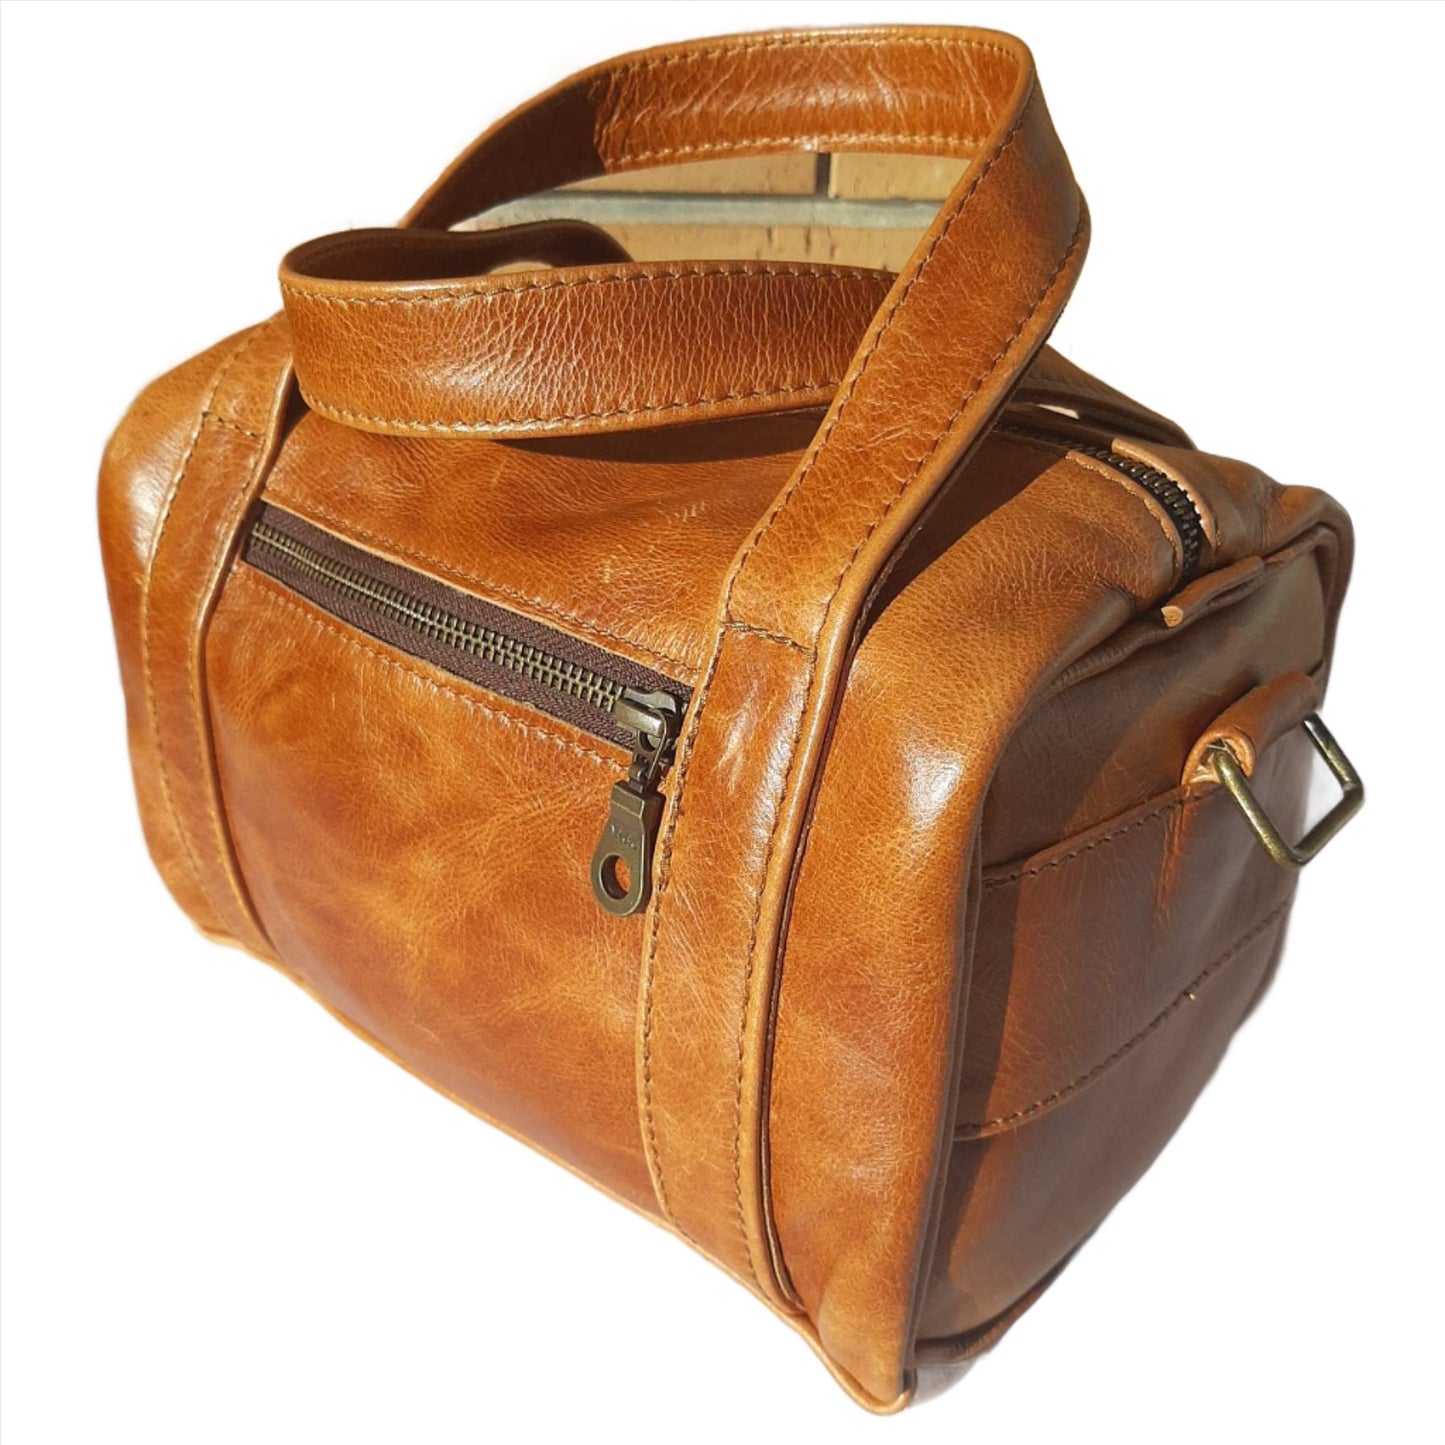 Alex Bathroom bags with Strap in light tan colour  from Cape Masai Leather 